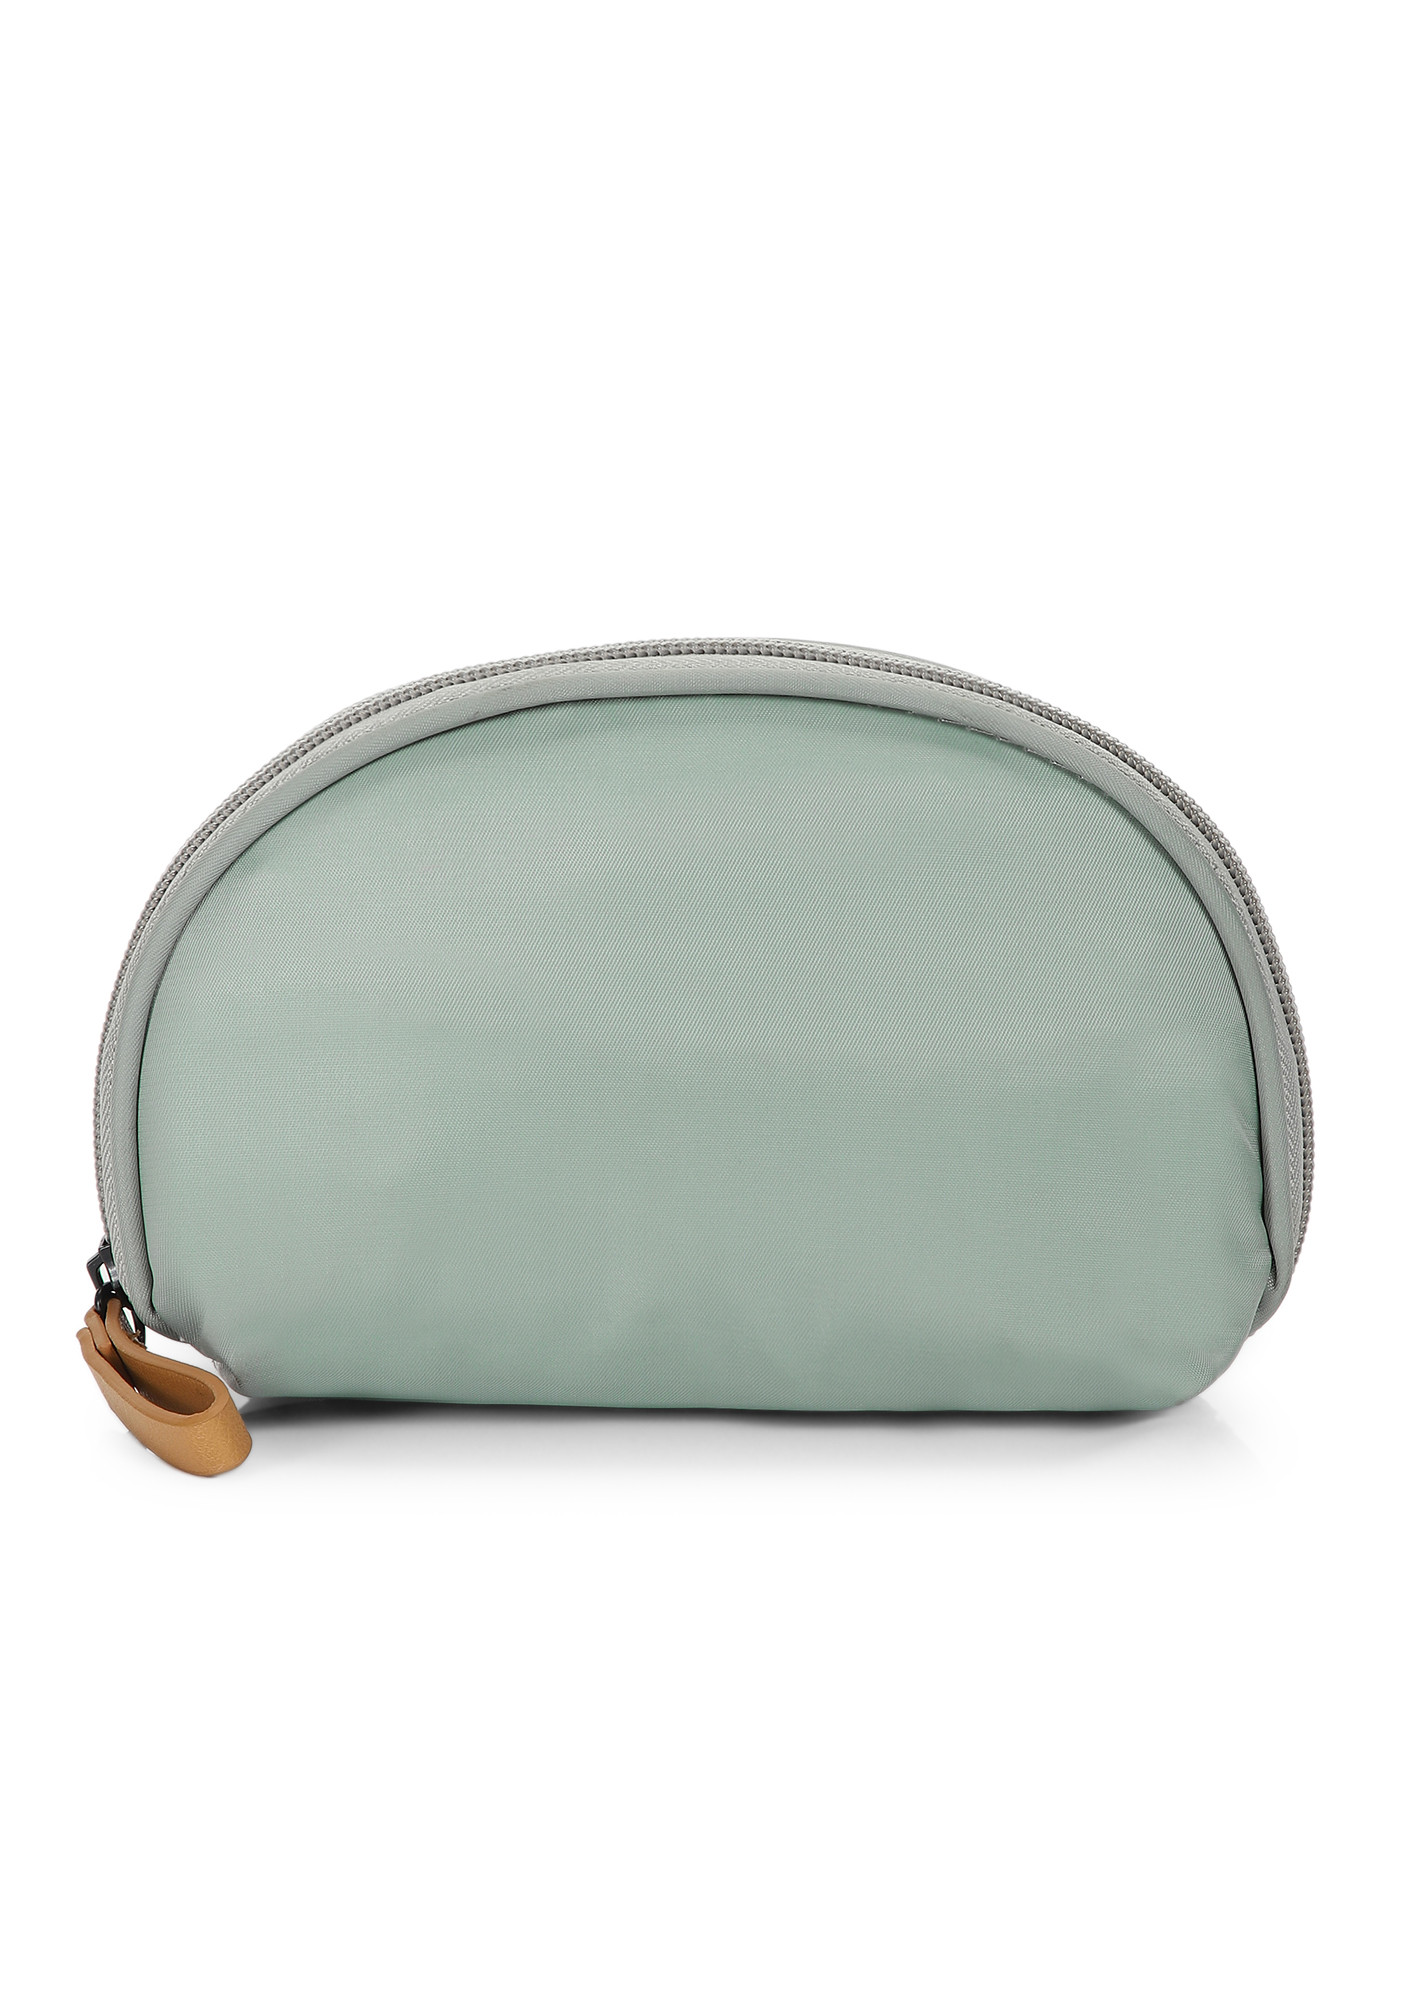 NO STRESS AT ALL GREY MAKE-UP POUCH 